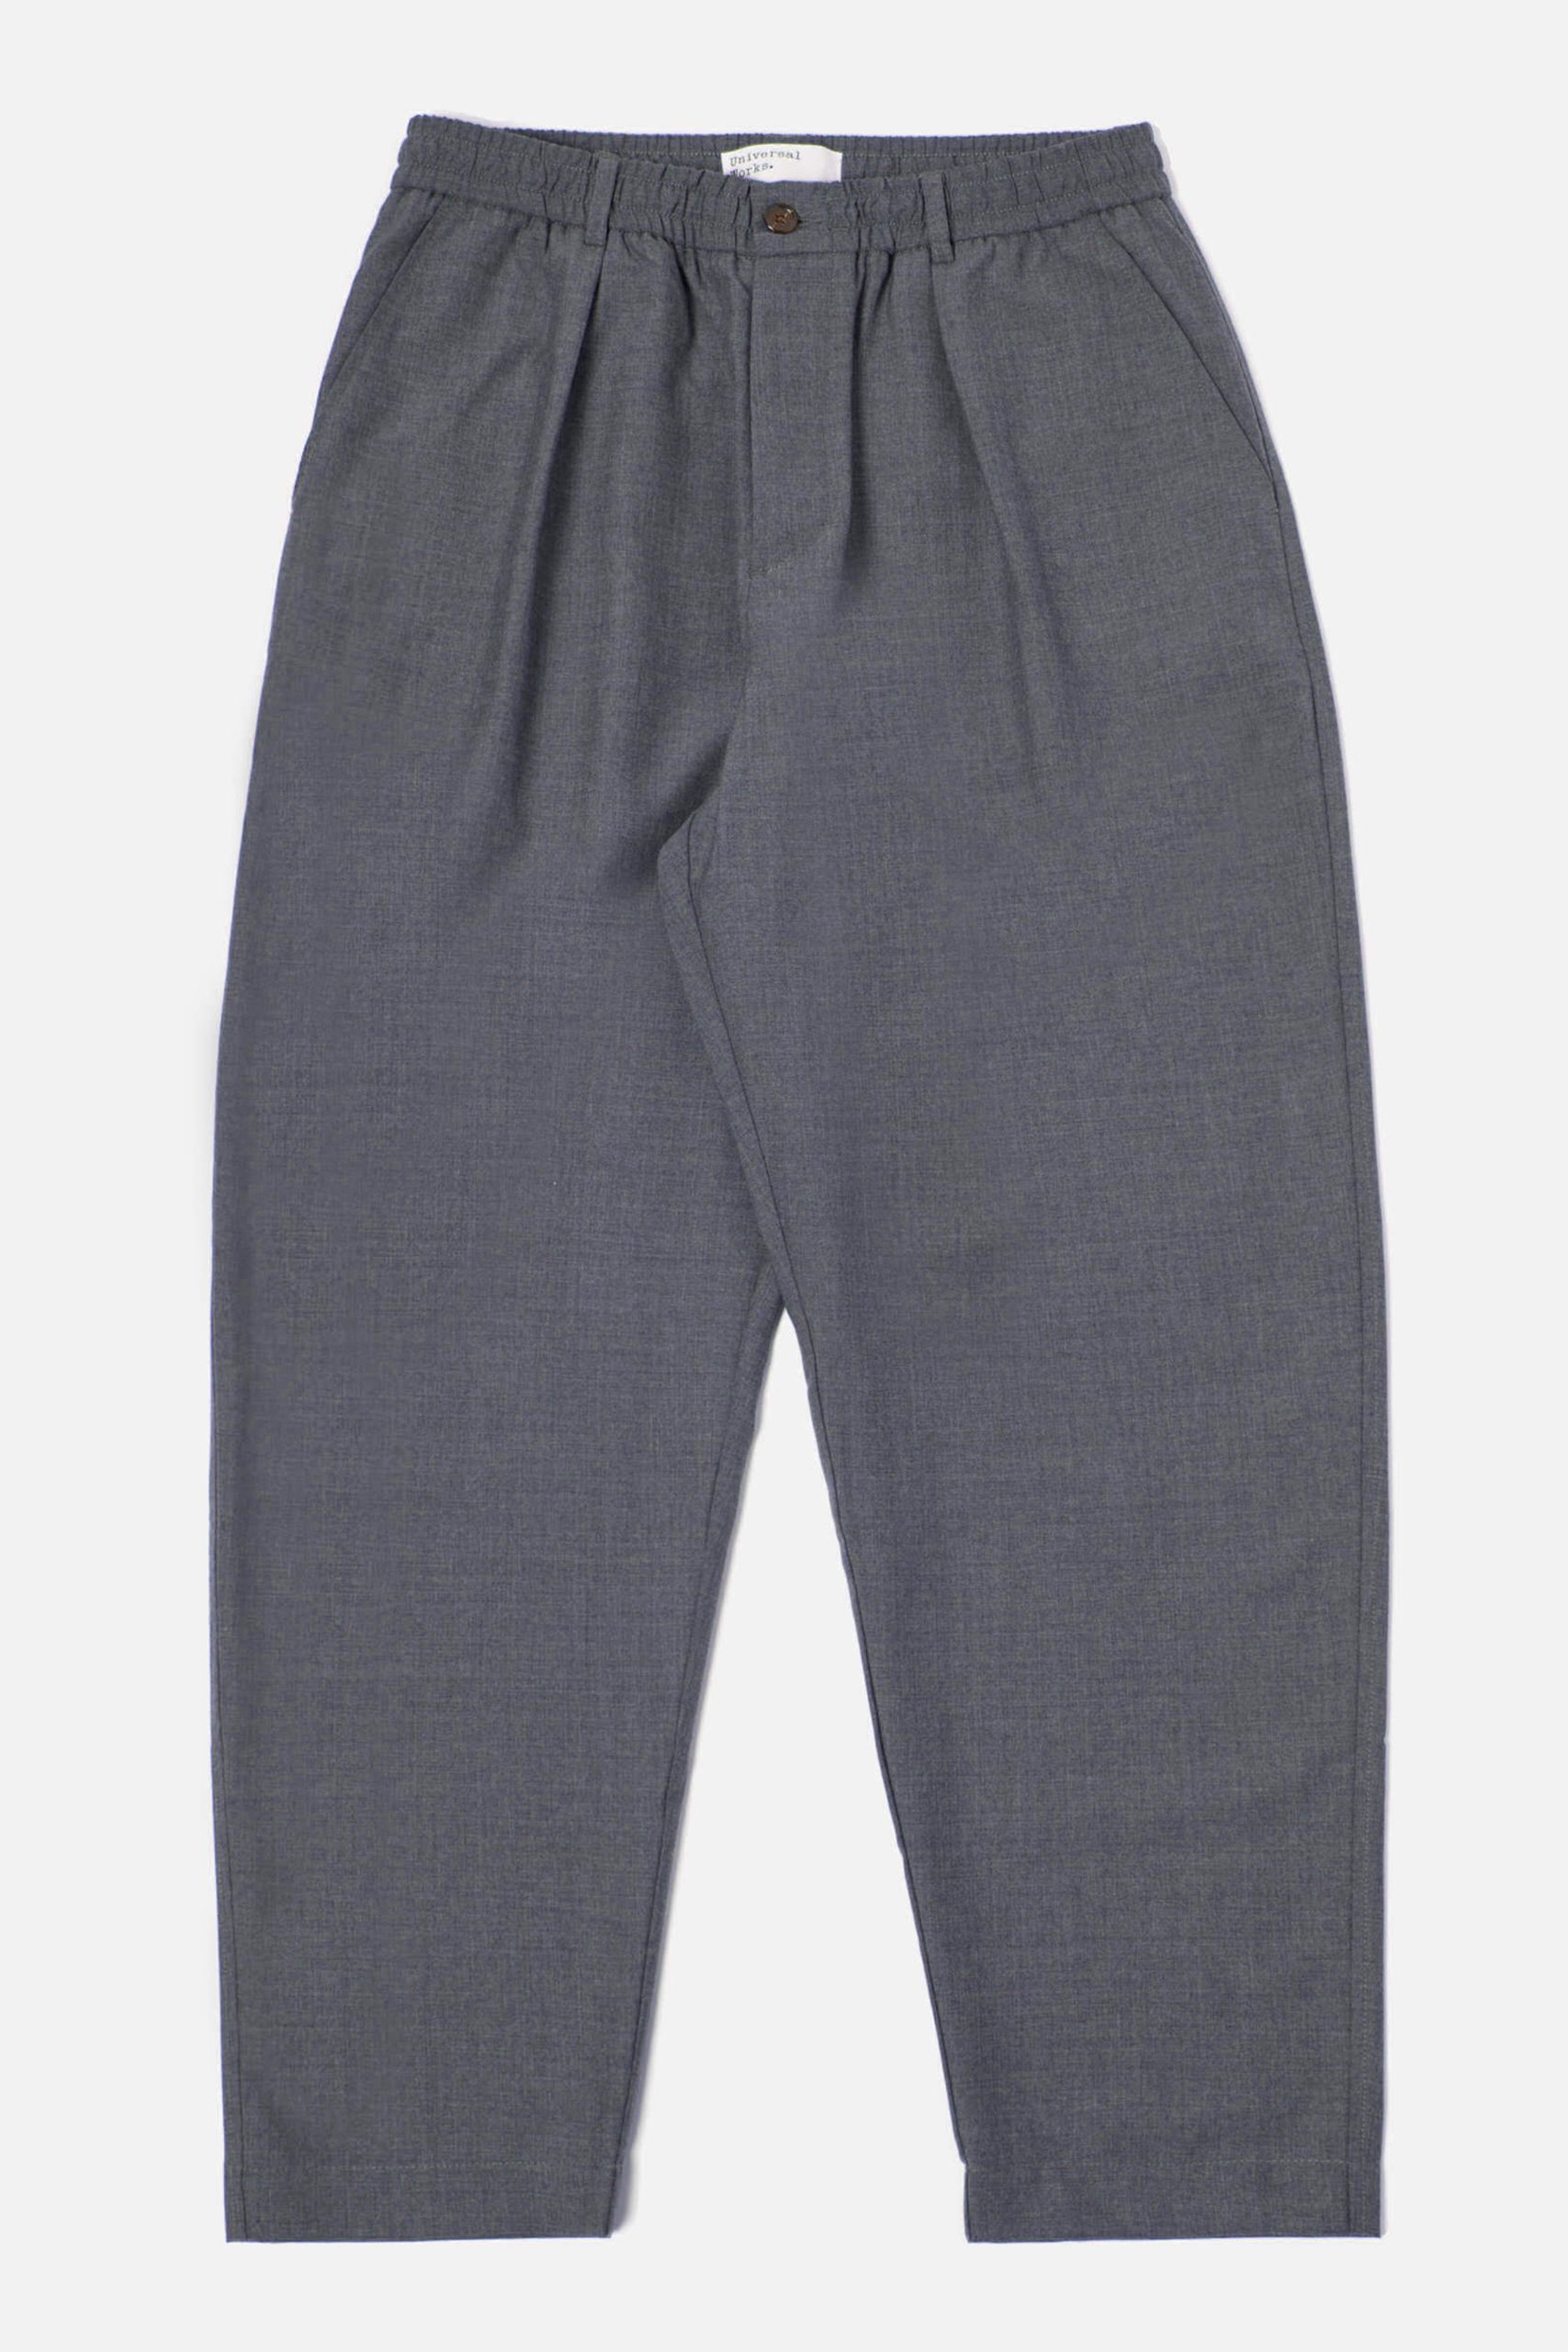 UNIVERSAL WORKS Pleated Track Pant In grey Marl Tropical Suiting